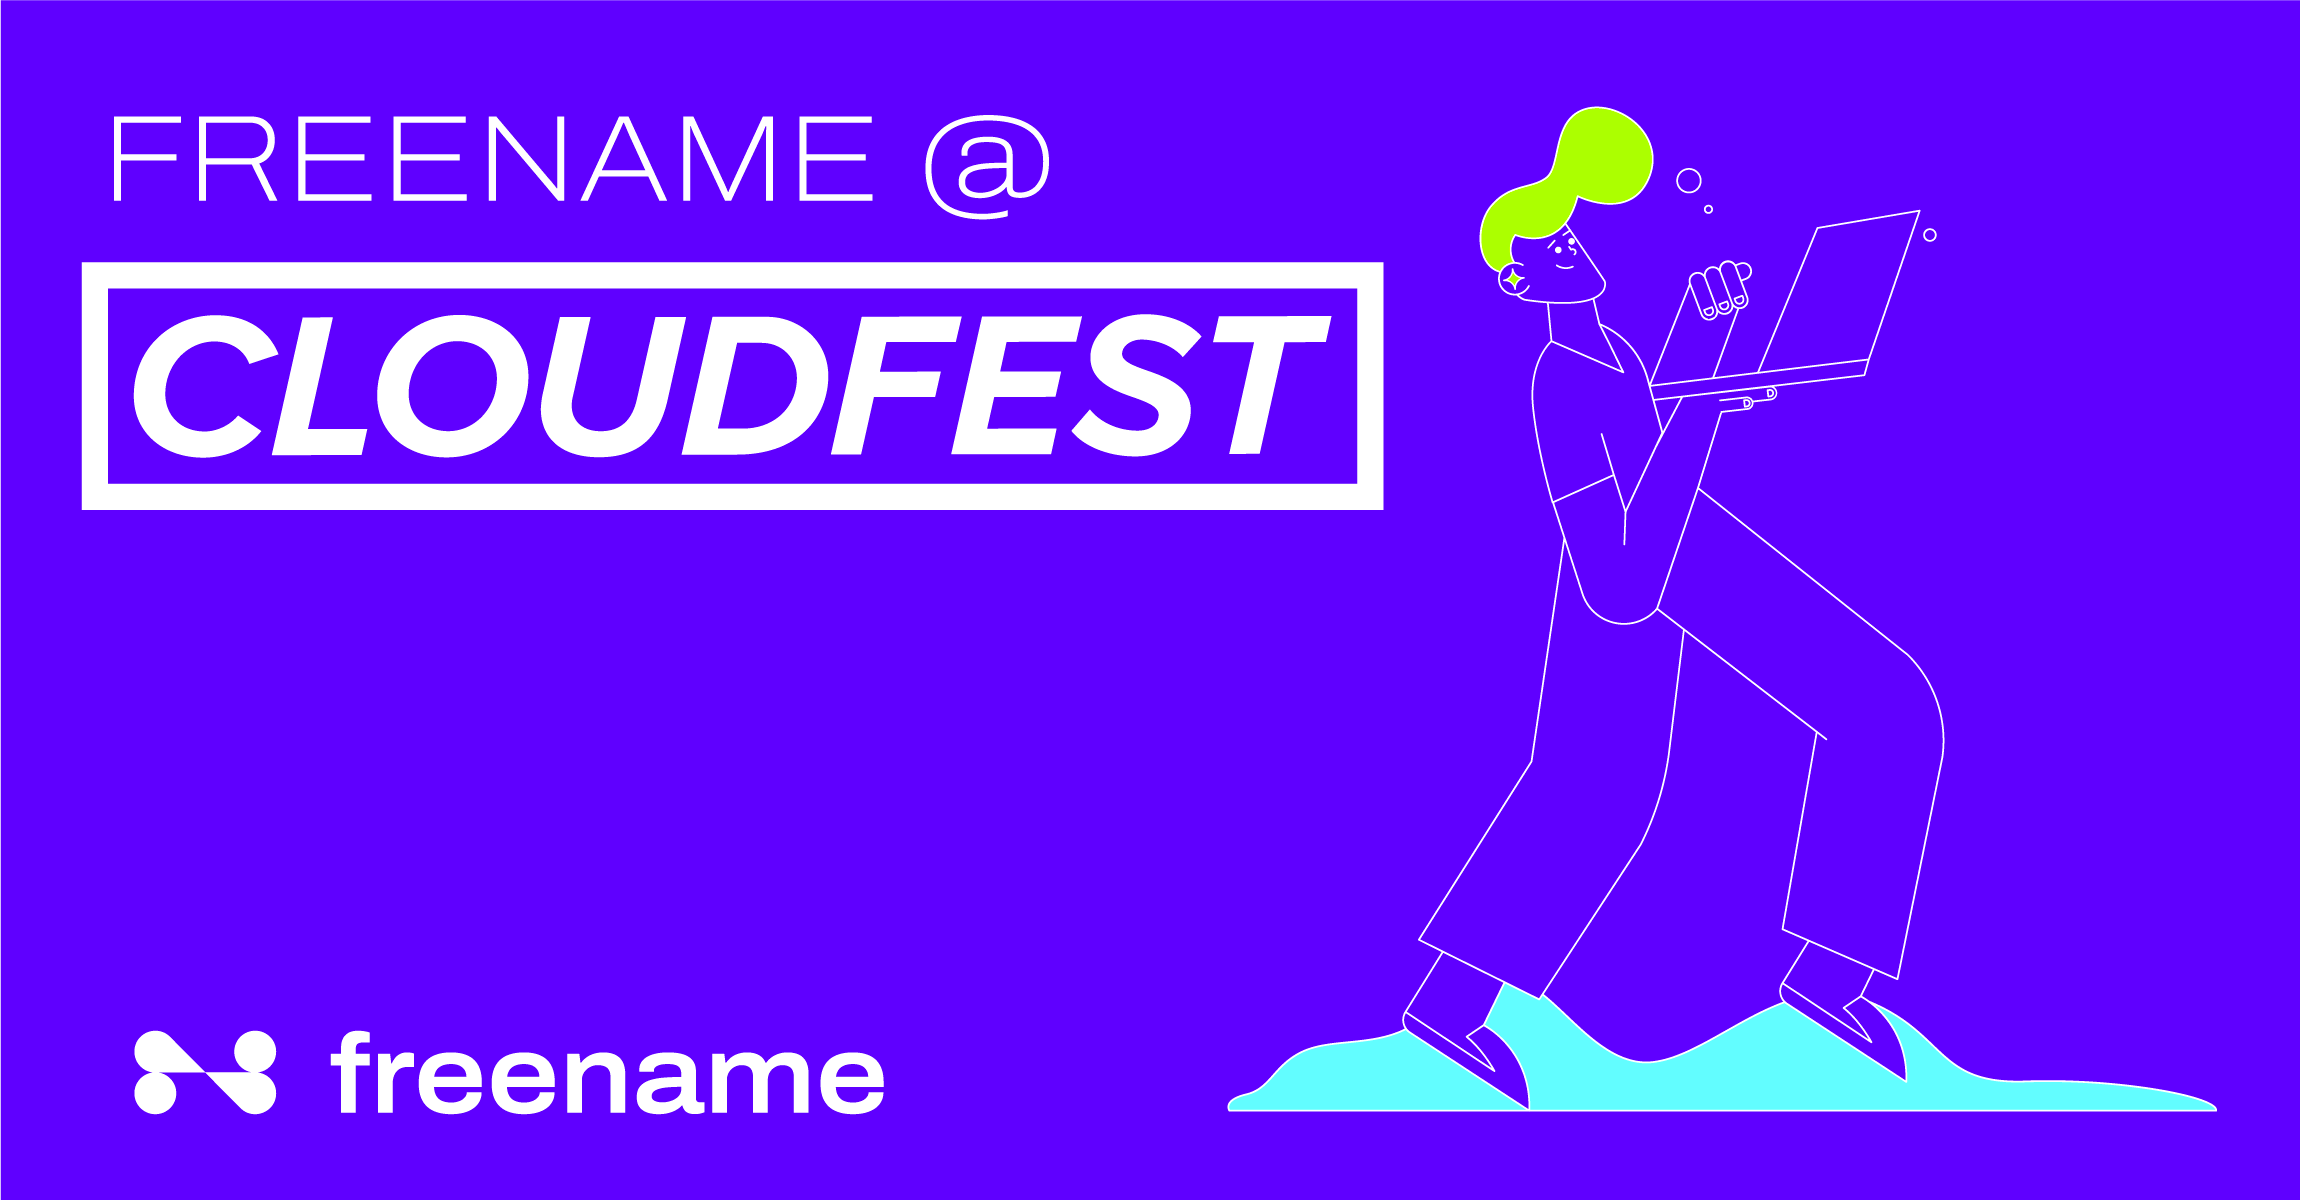 Freename at Cloudfest